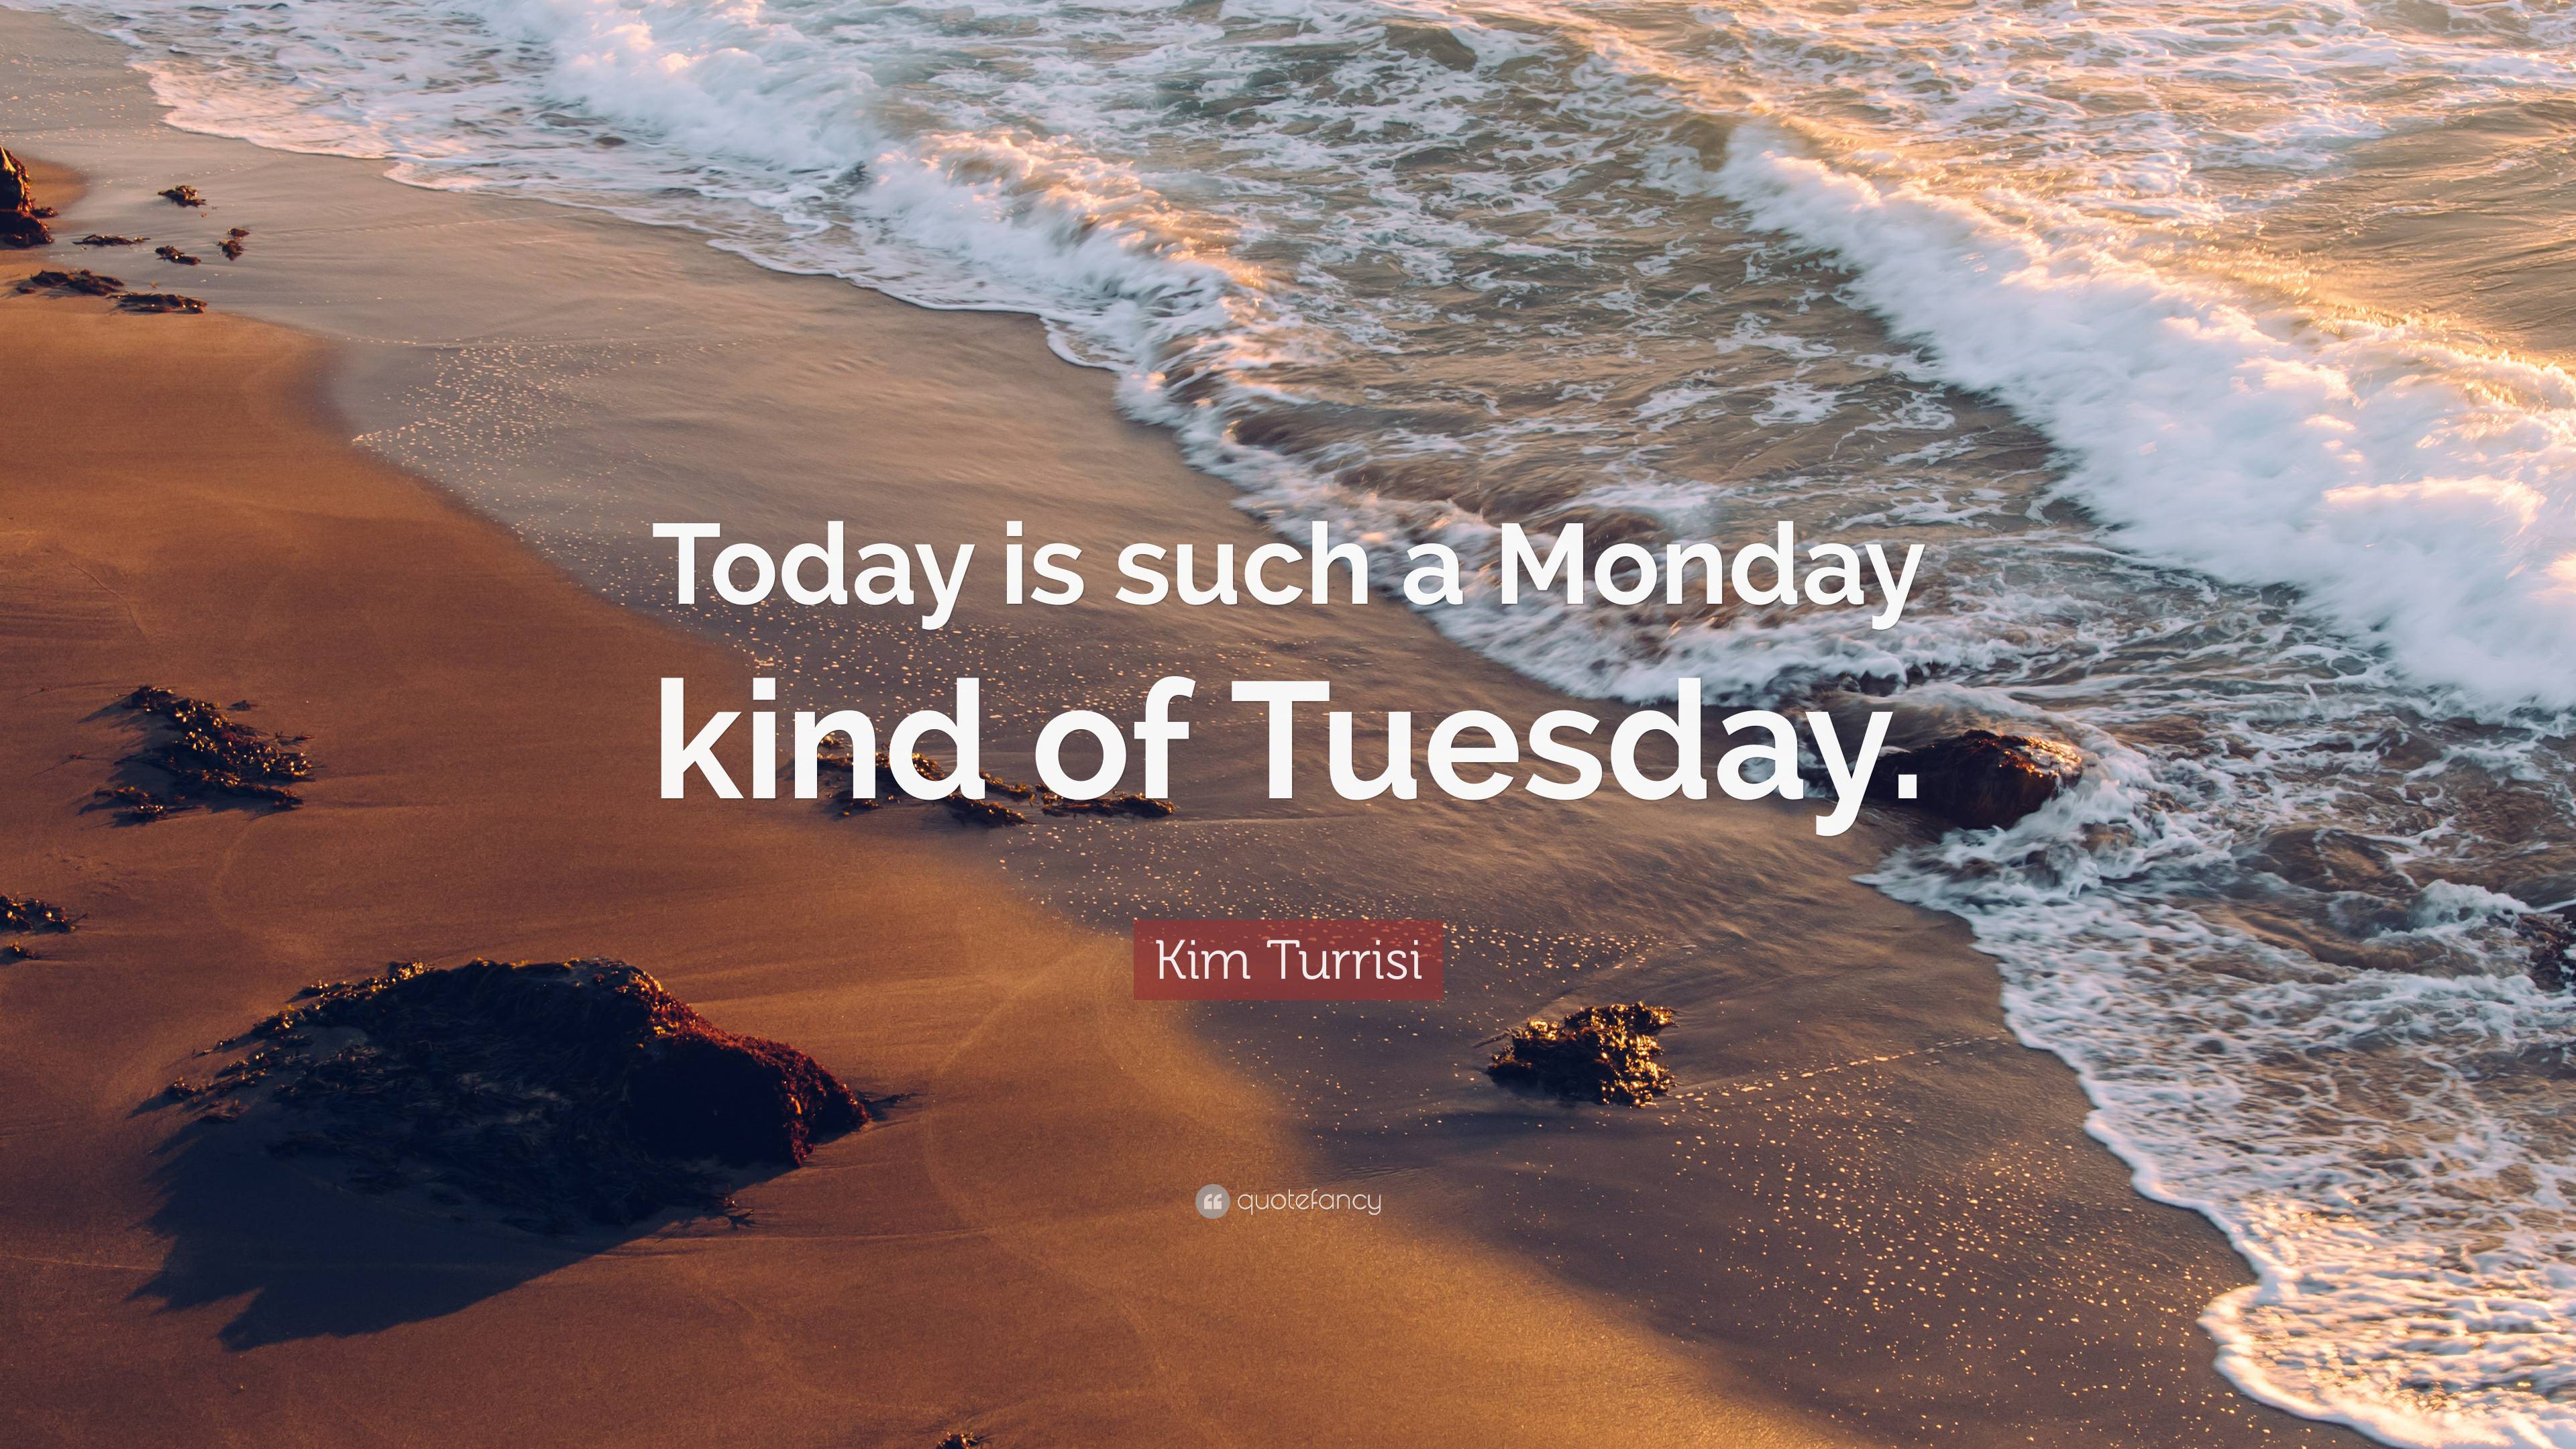 Kim Turrisi Quote: “Today is such a Monday kind of Tuesday.”